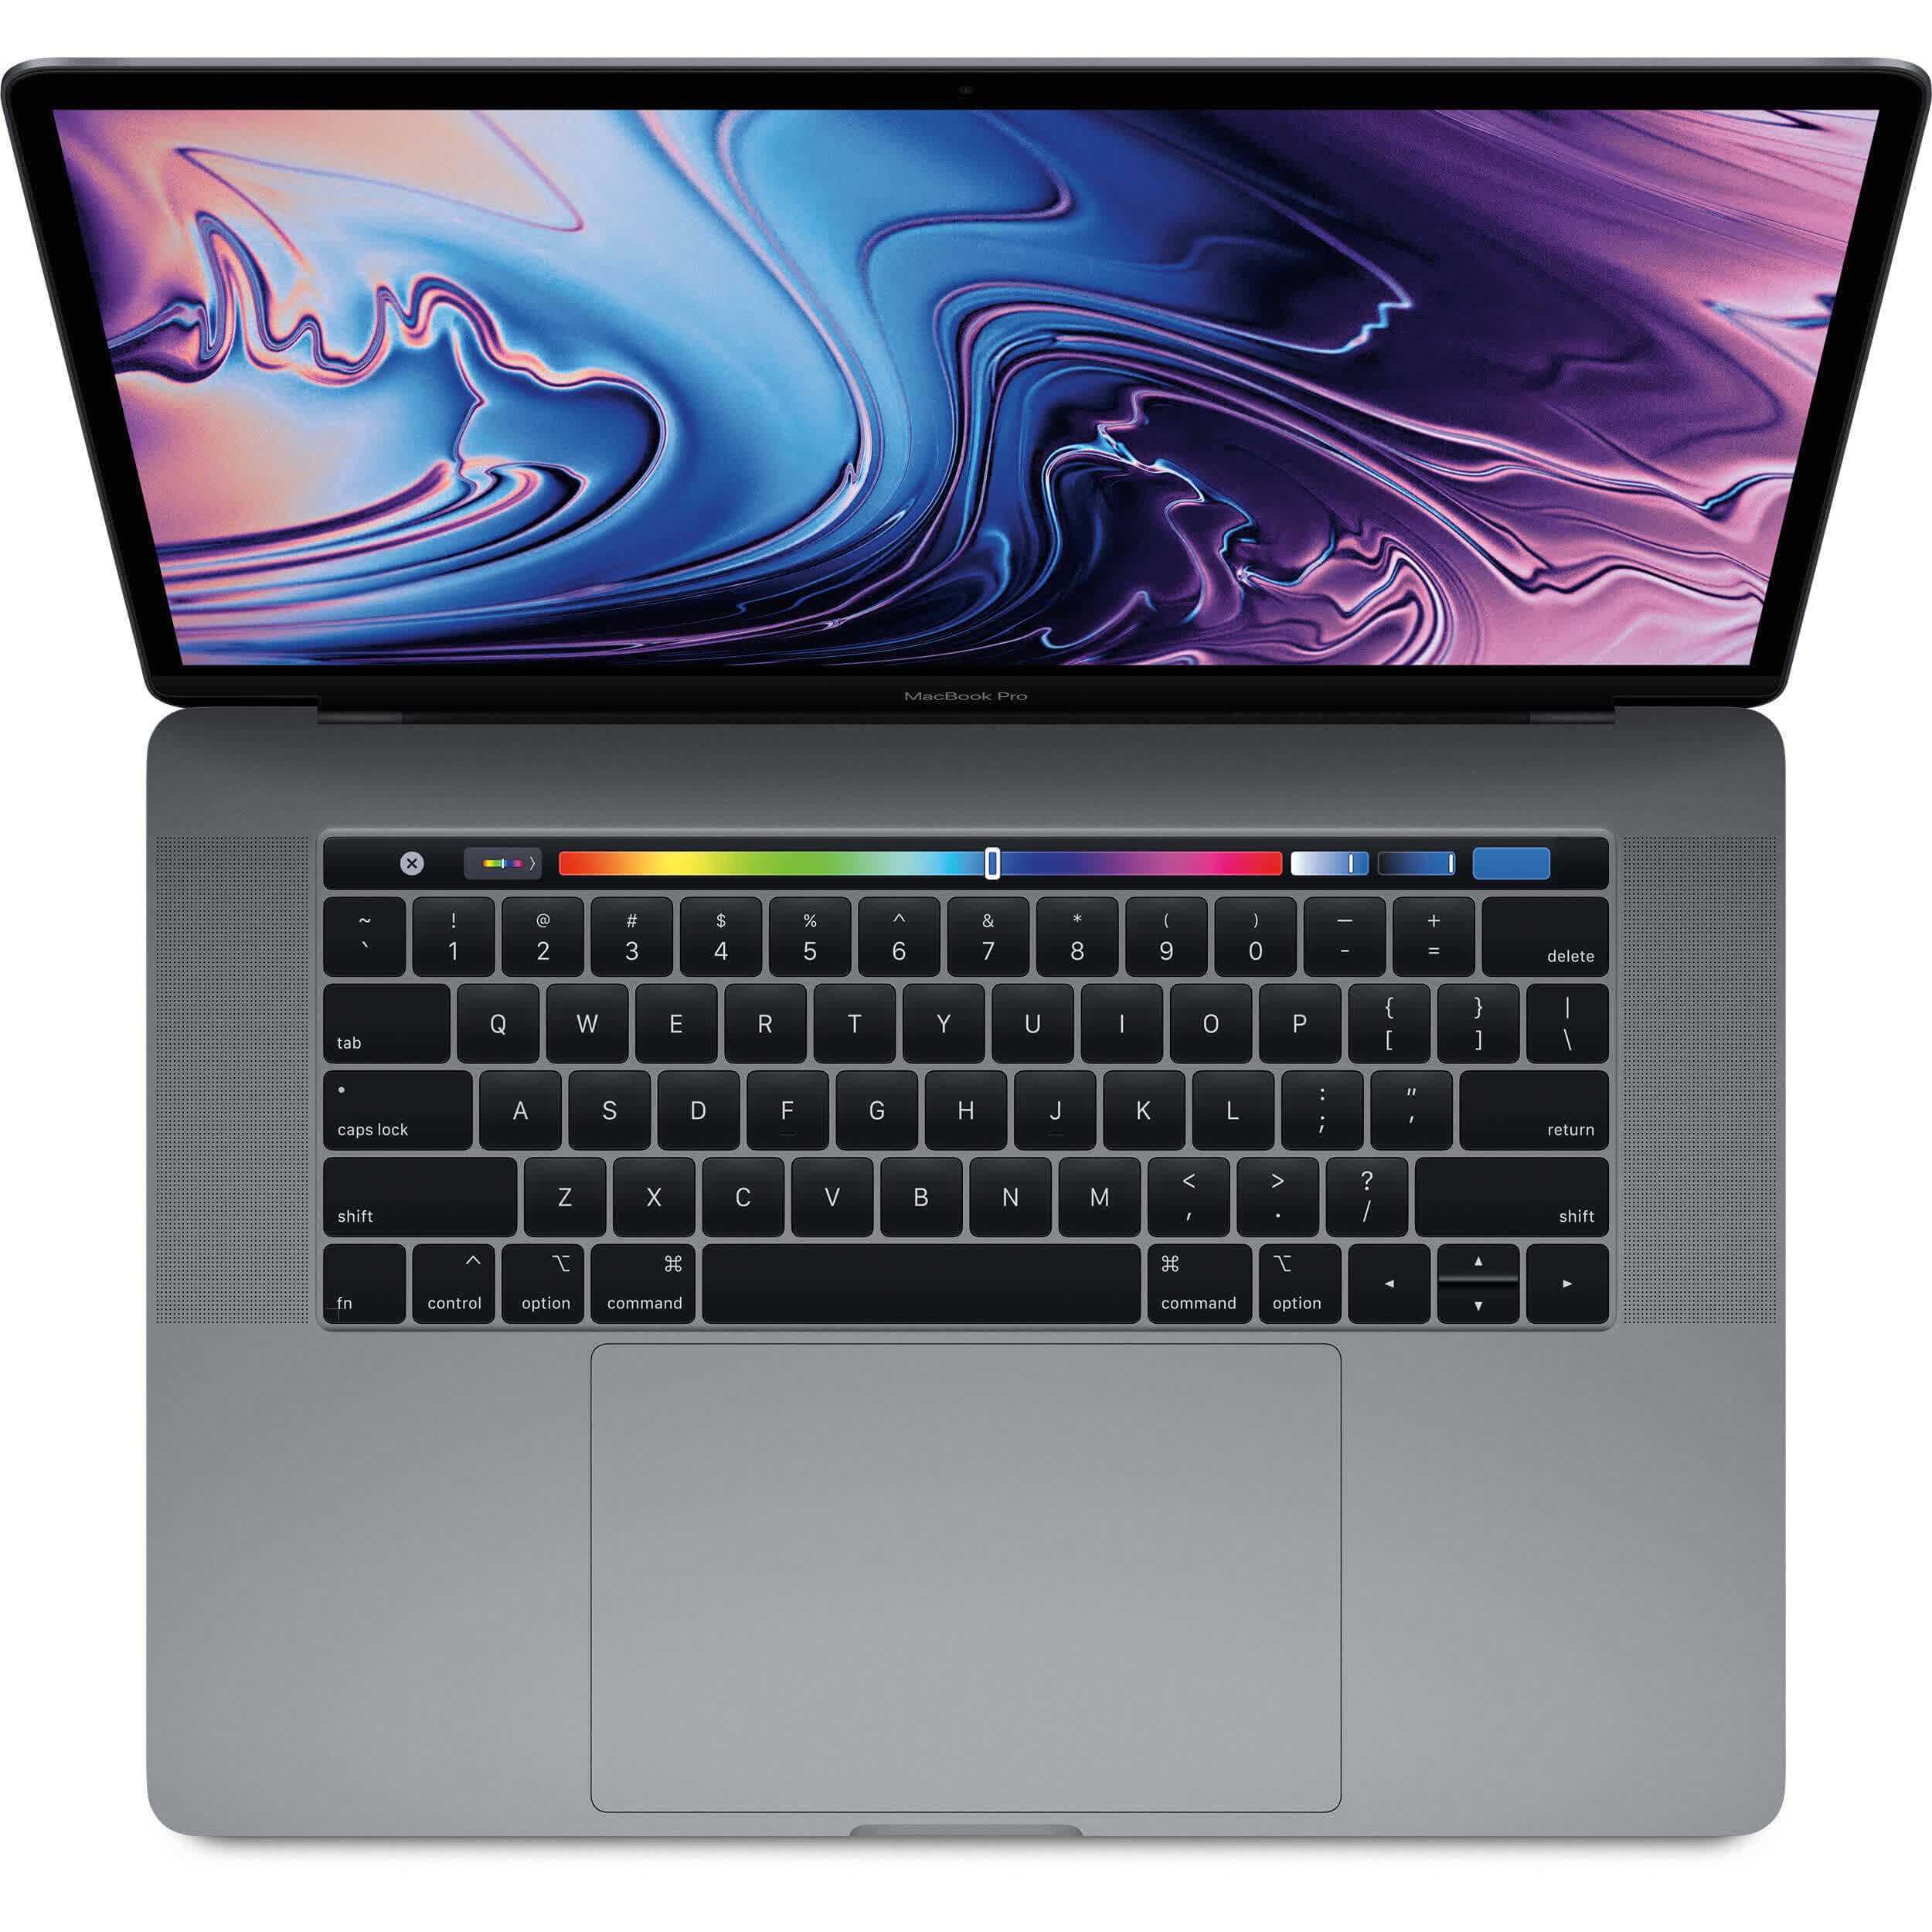 Apple MacBook Pro 15 - Mid 2019 Reviews, Pros and Cons | TechSpot